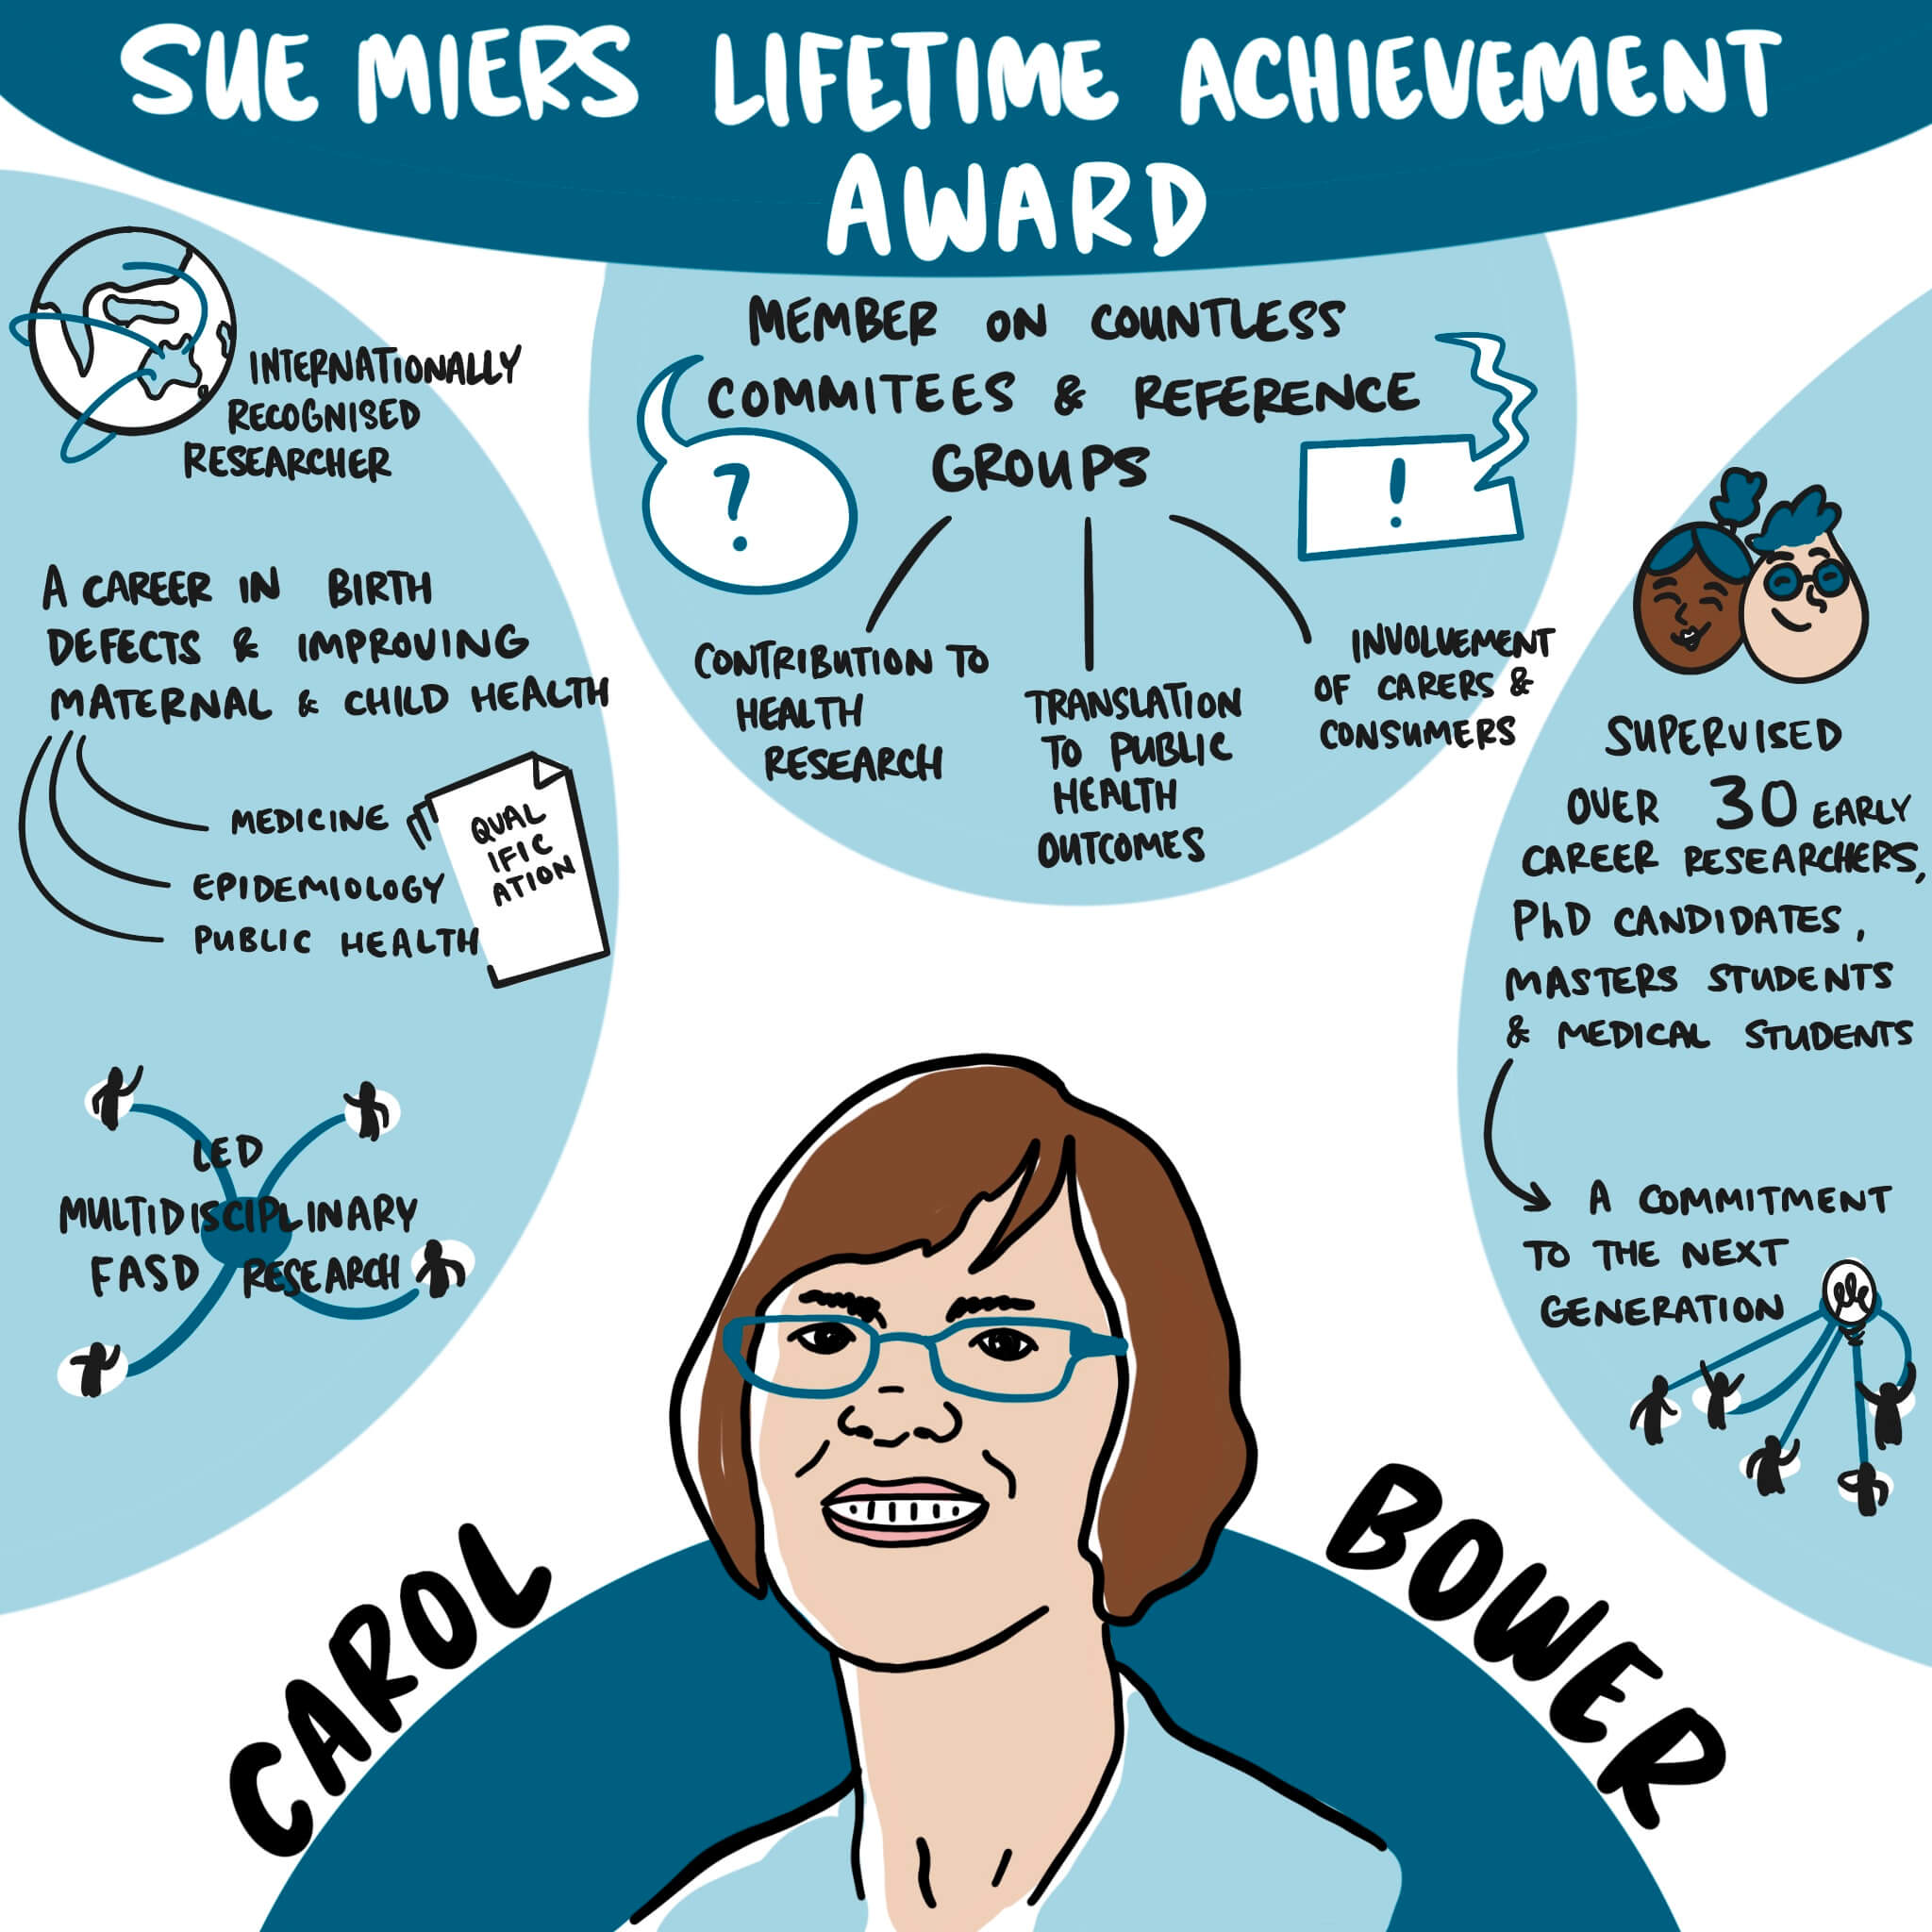 Illustration of Professor Carol Bower with a mind map of her career achievements